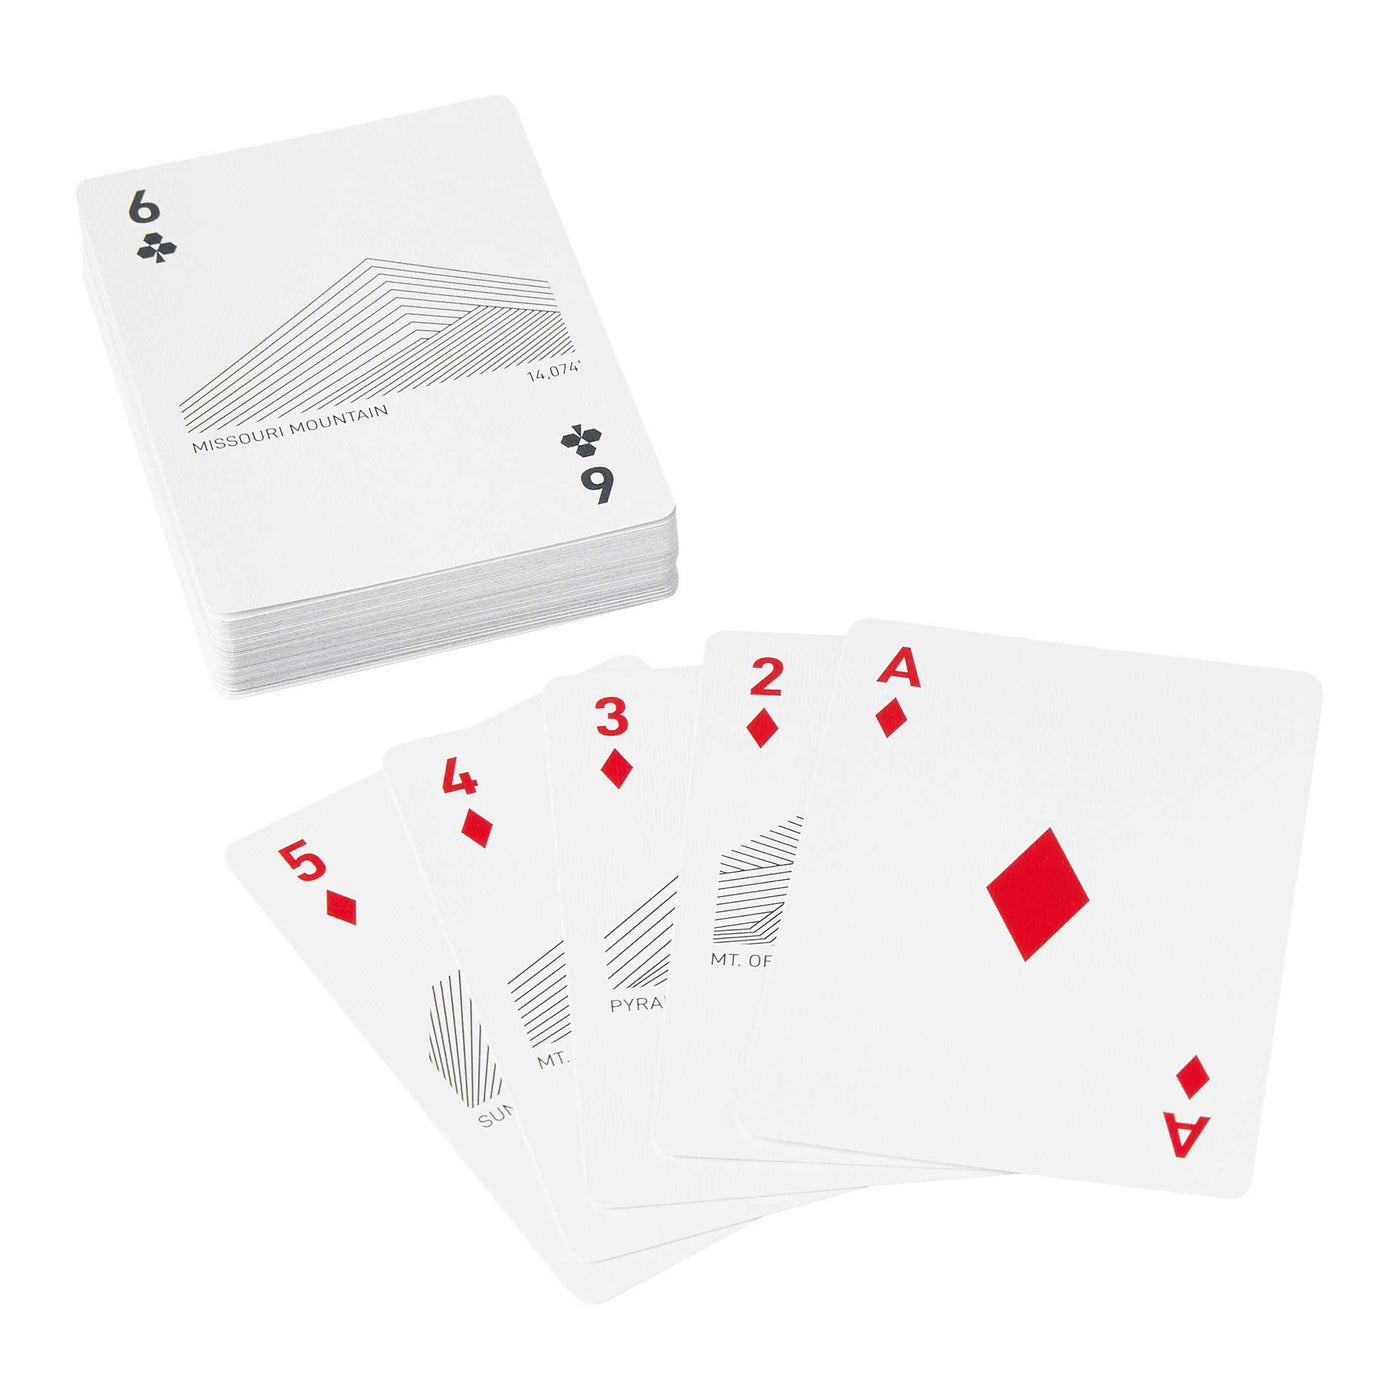 Stacked Deck with 6 of Clubs along side Flush of Diamonds 5 through Ace